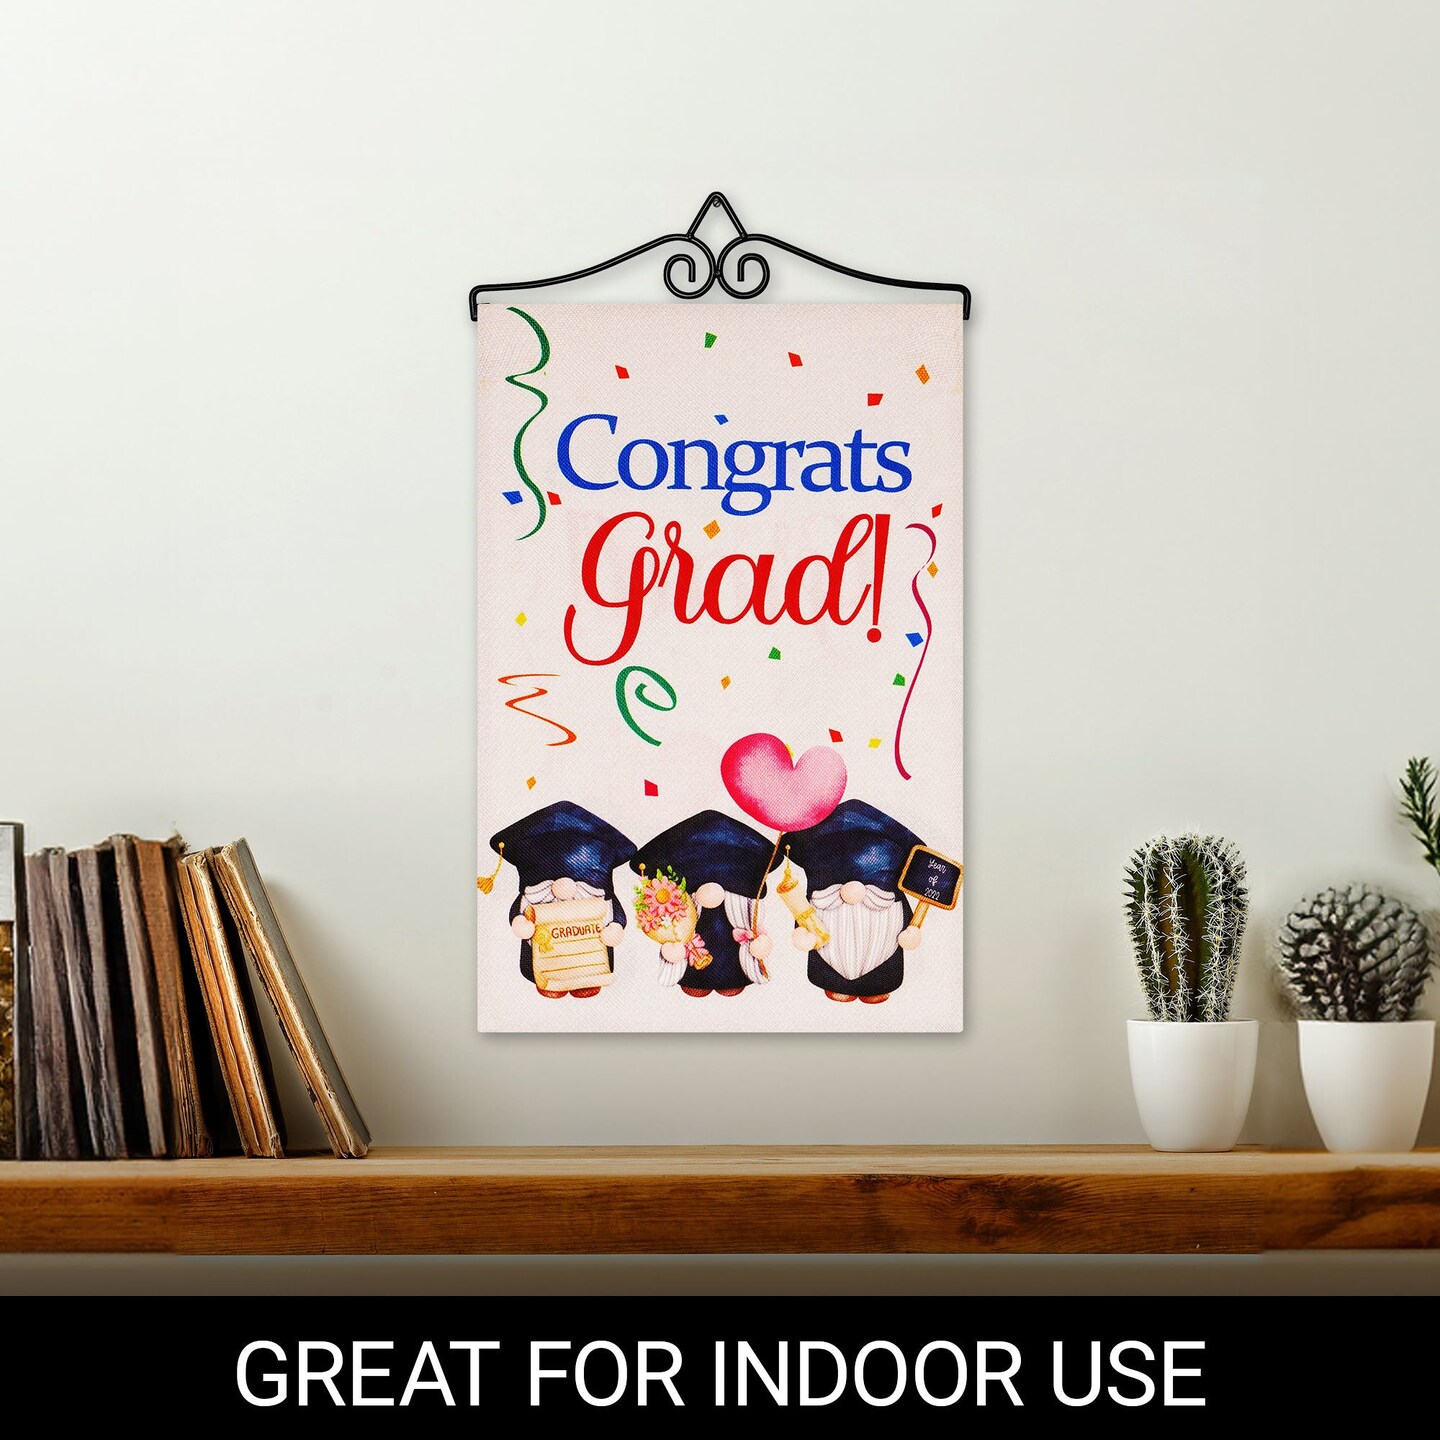 G128 Combo Pack Garden Flag Hanger 14IN &#x26; Garden Flag Congrats Grad 3 Gnomes Graduating 12x18IN Printed Double Sided Burlap Fabric